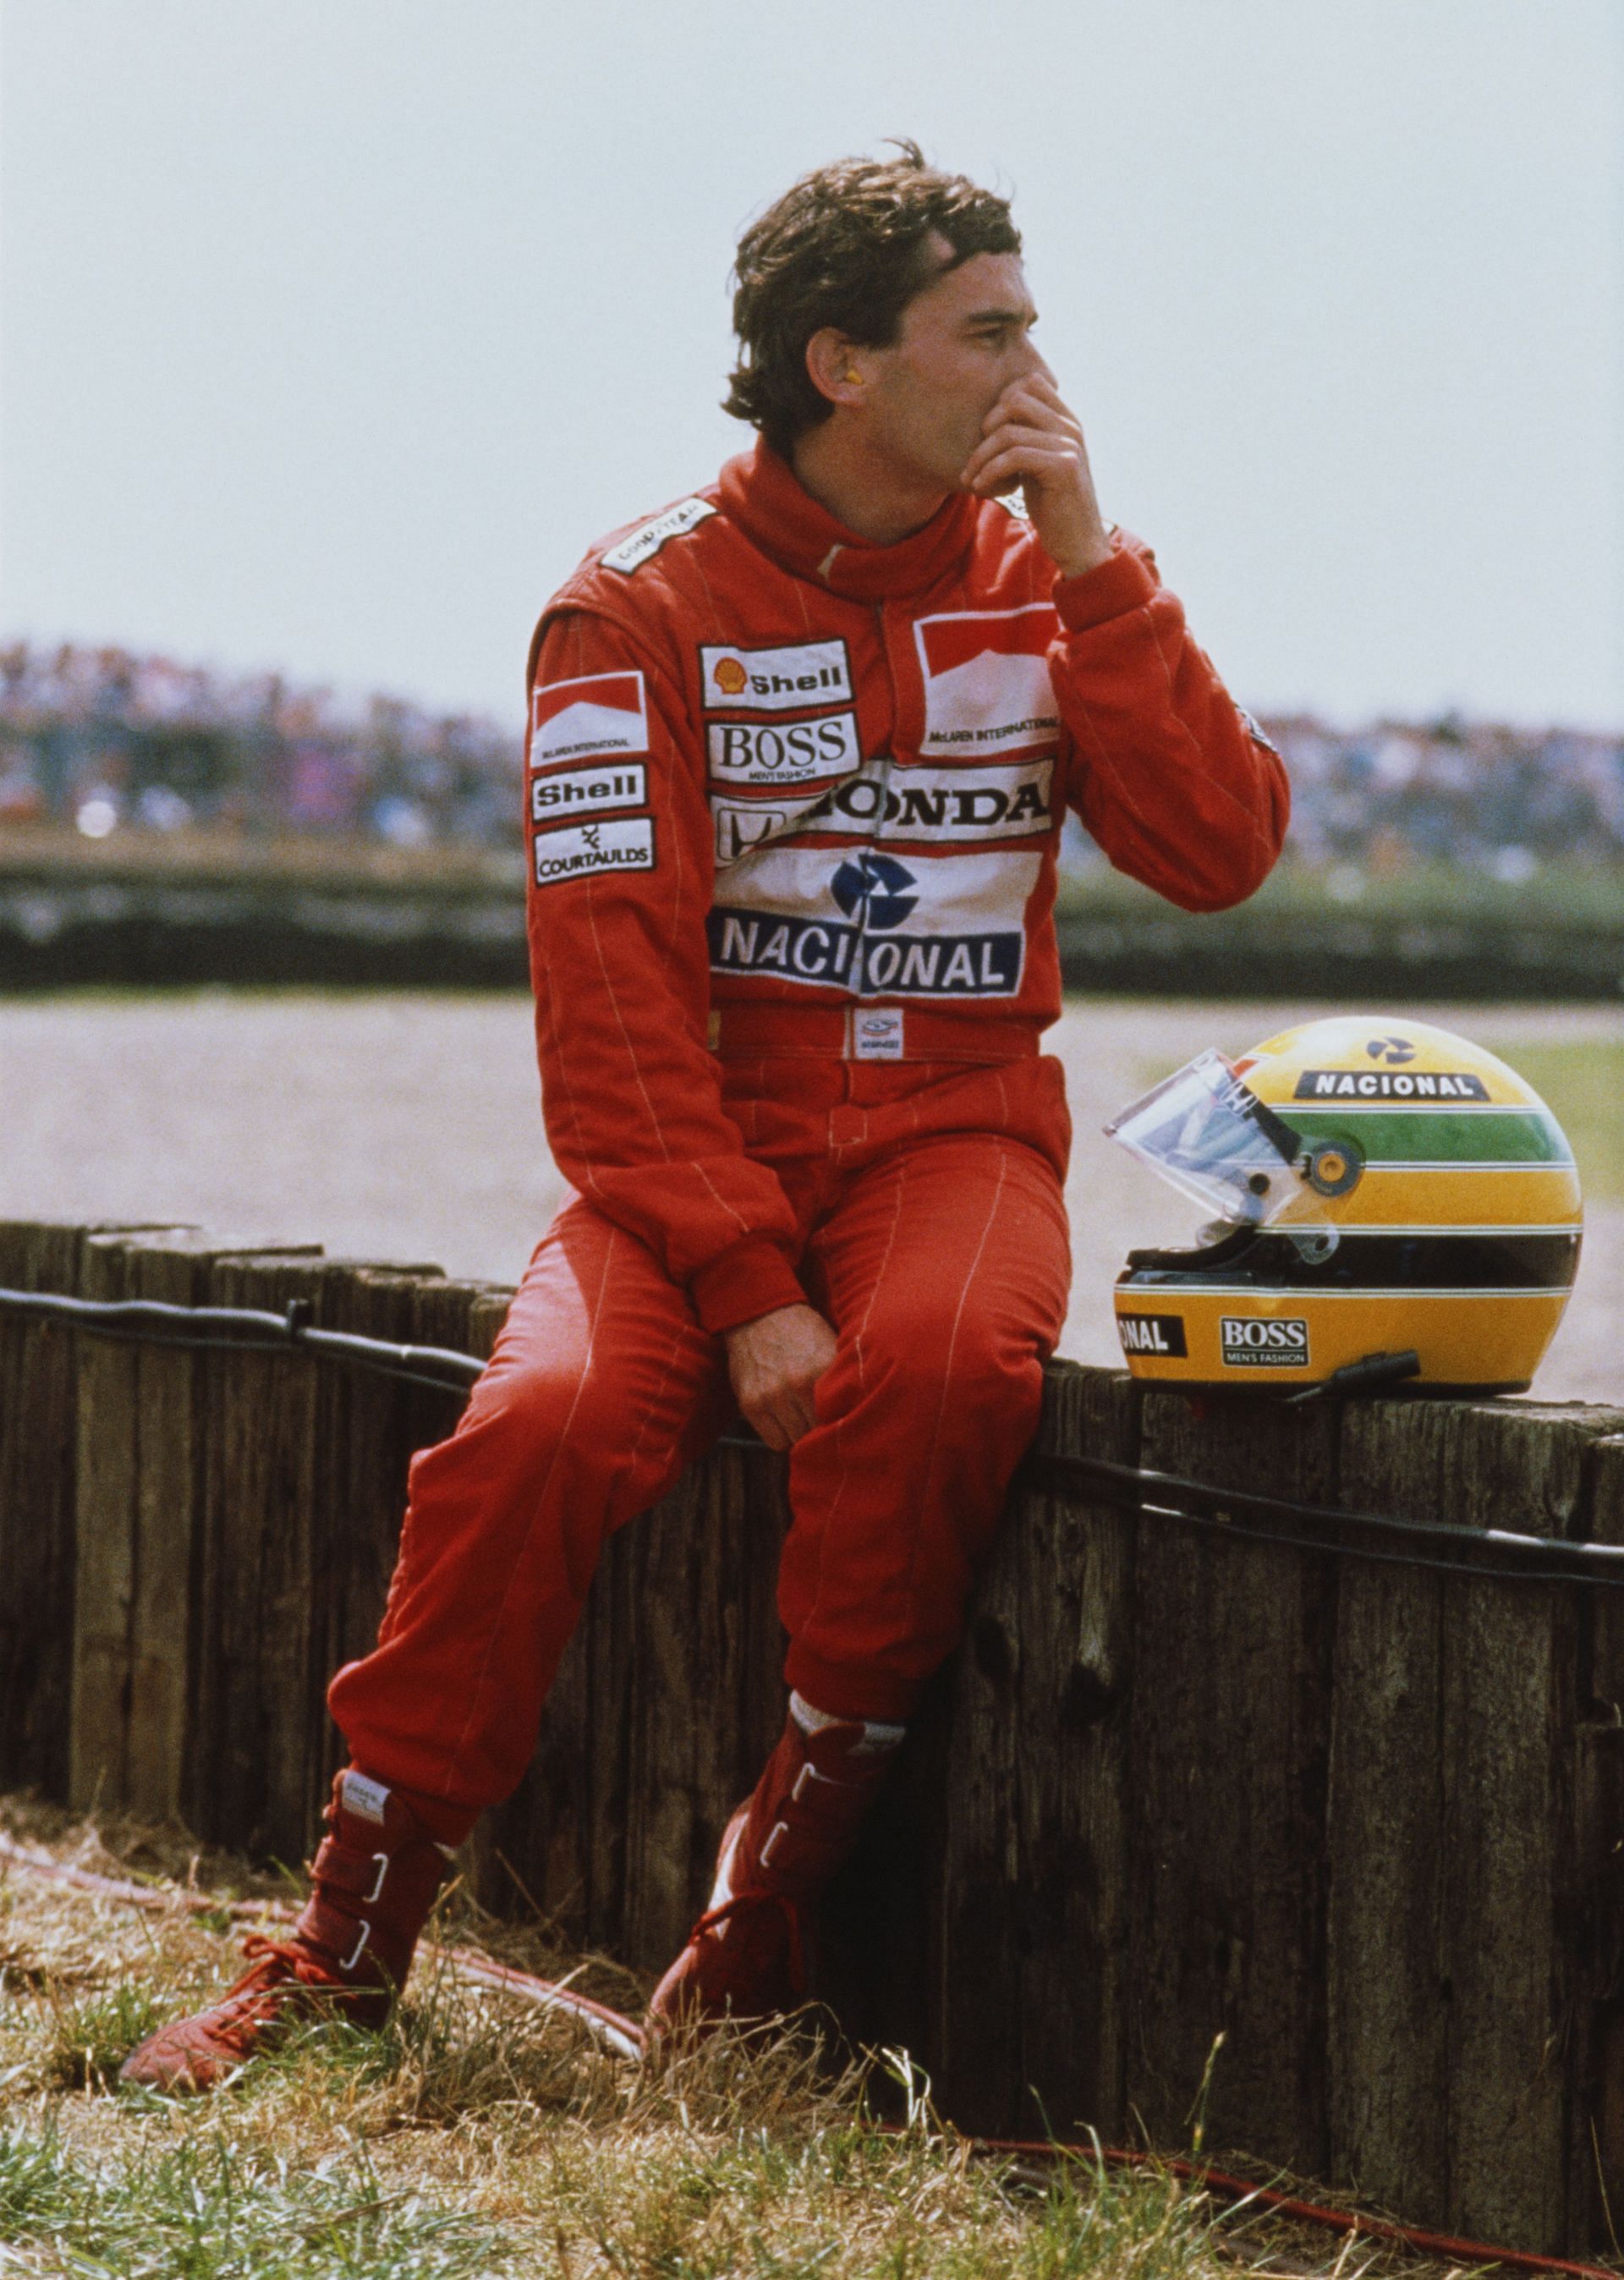 Senna at Silverstone Circuit in Towcester, Great Britain. (Photo by Pascal Rondeau/Getty Images)